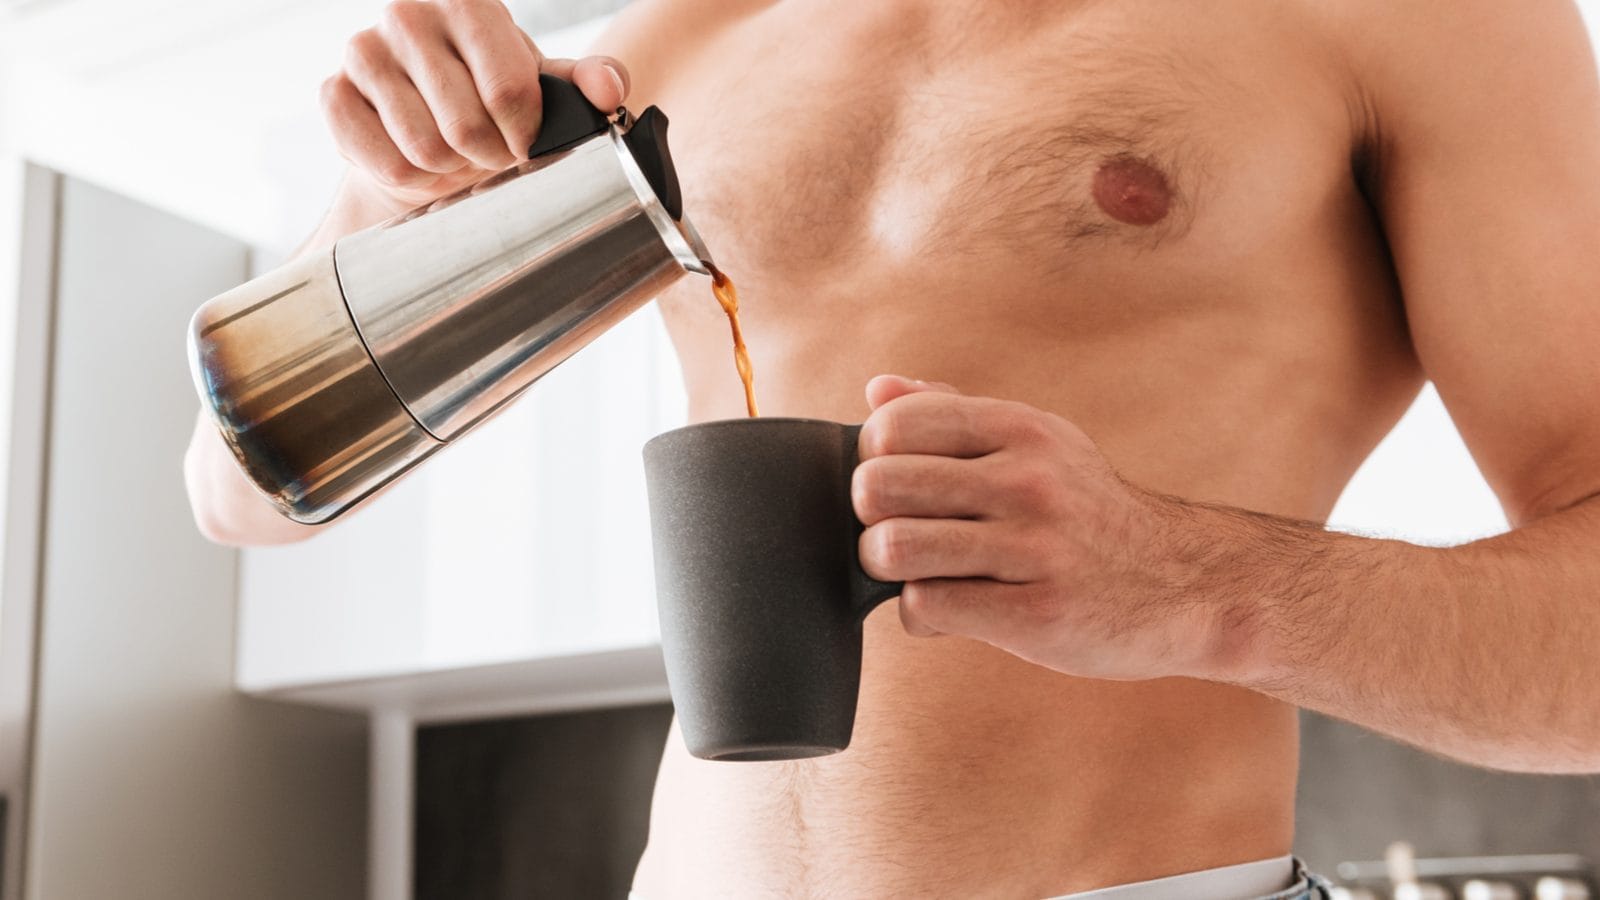 Weight Loss: Here’s How Your Morning Cup of Coffee can Help Shed Kilos